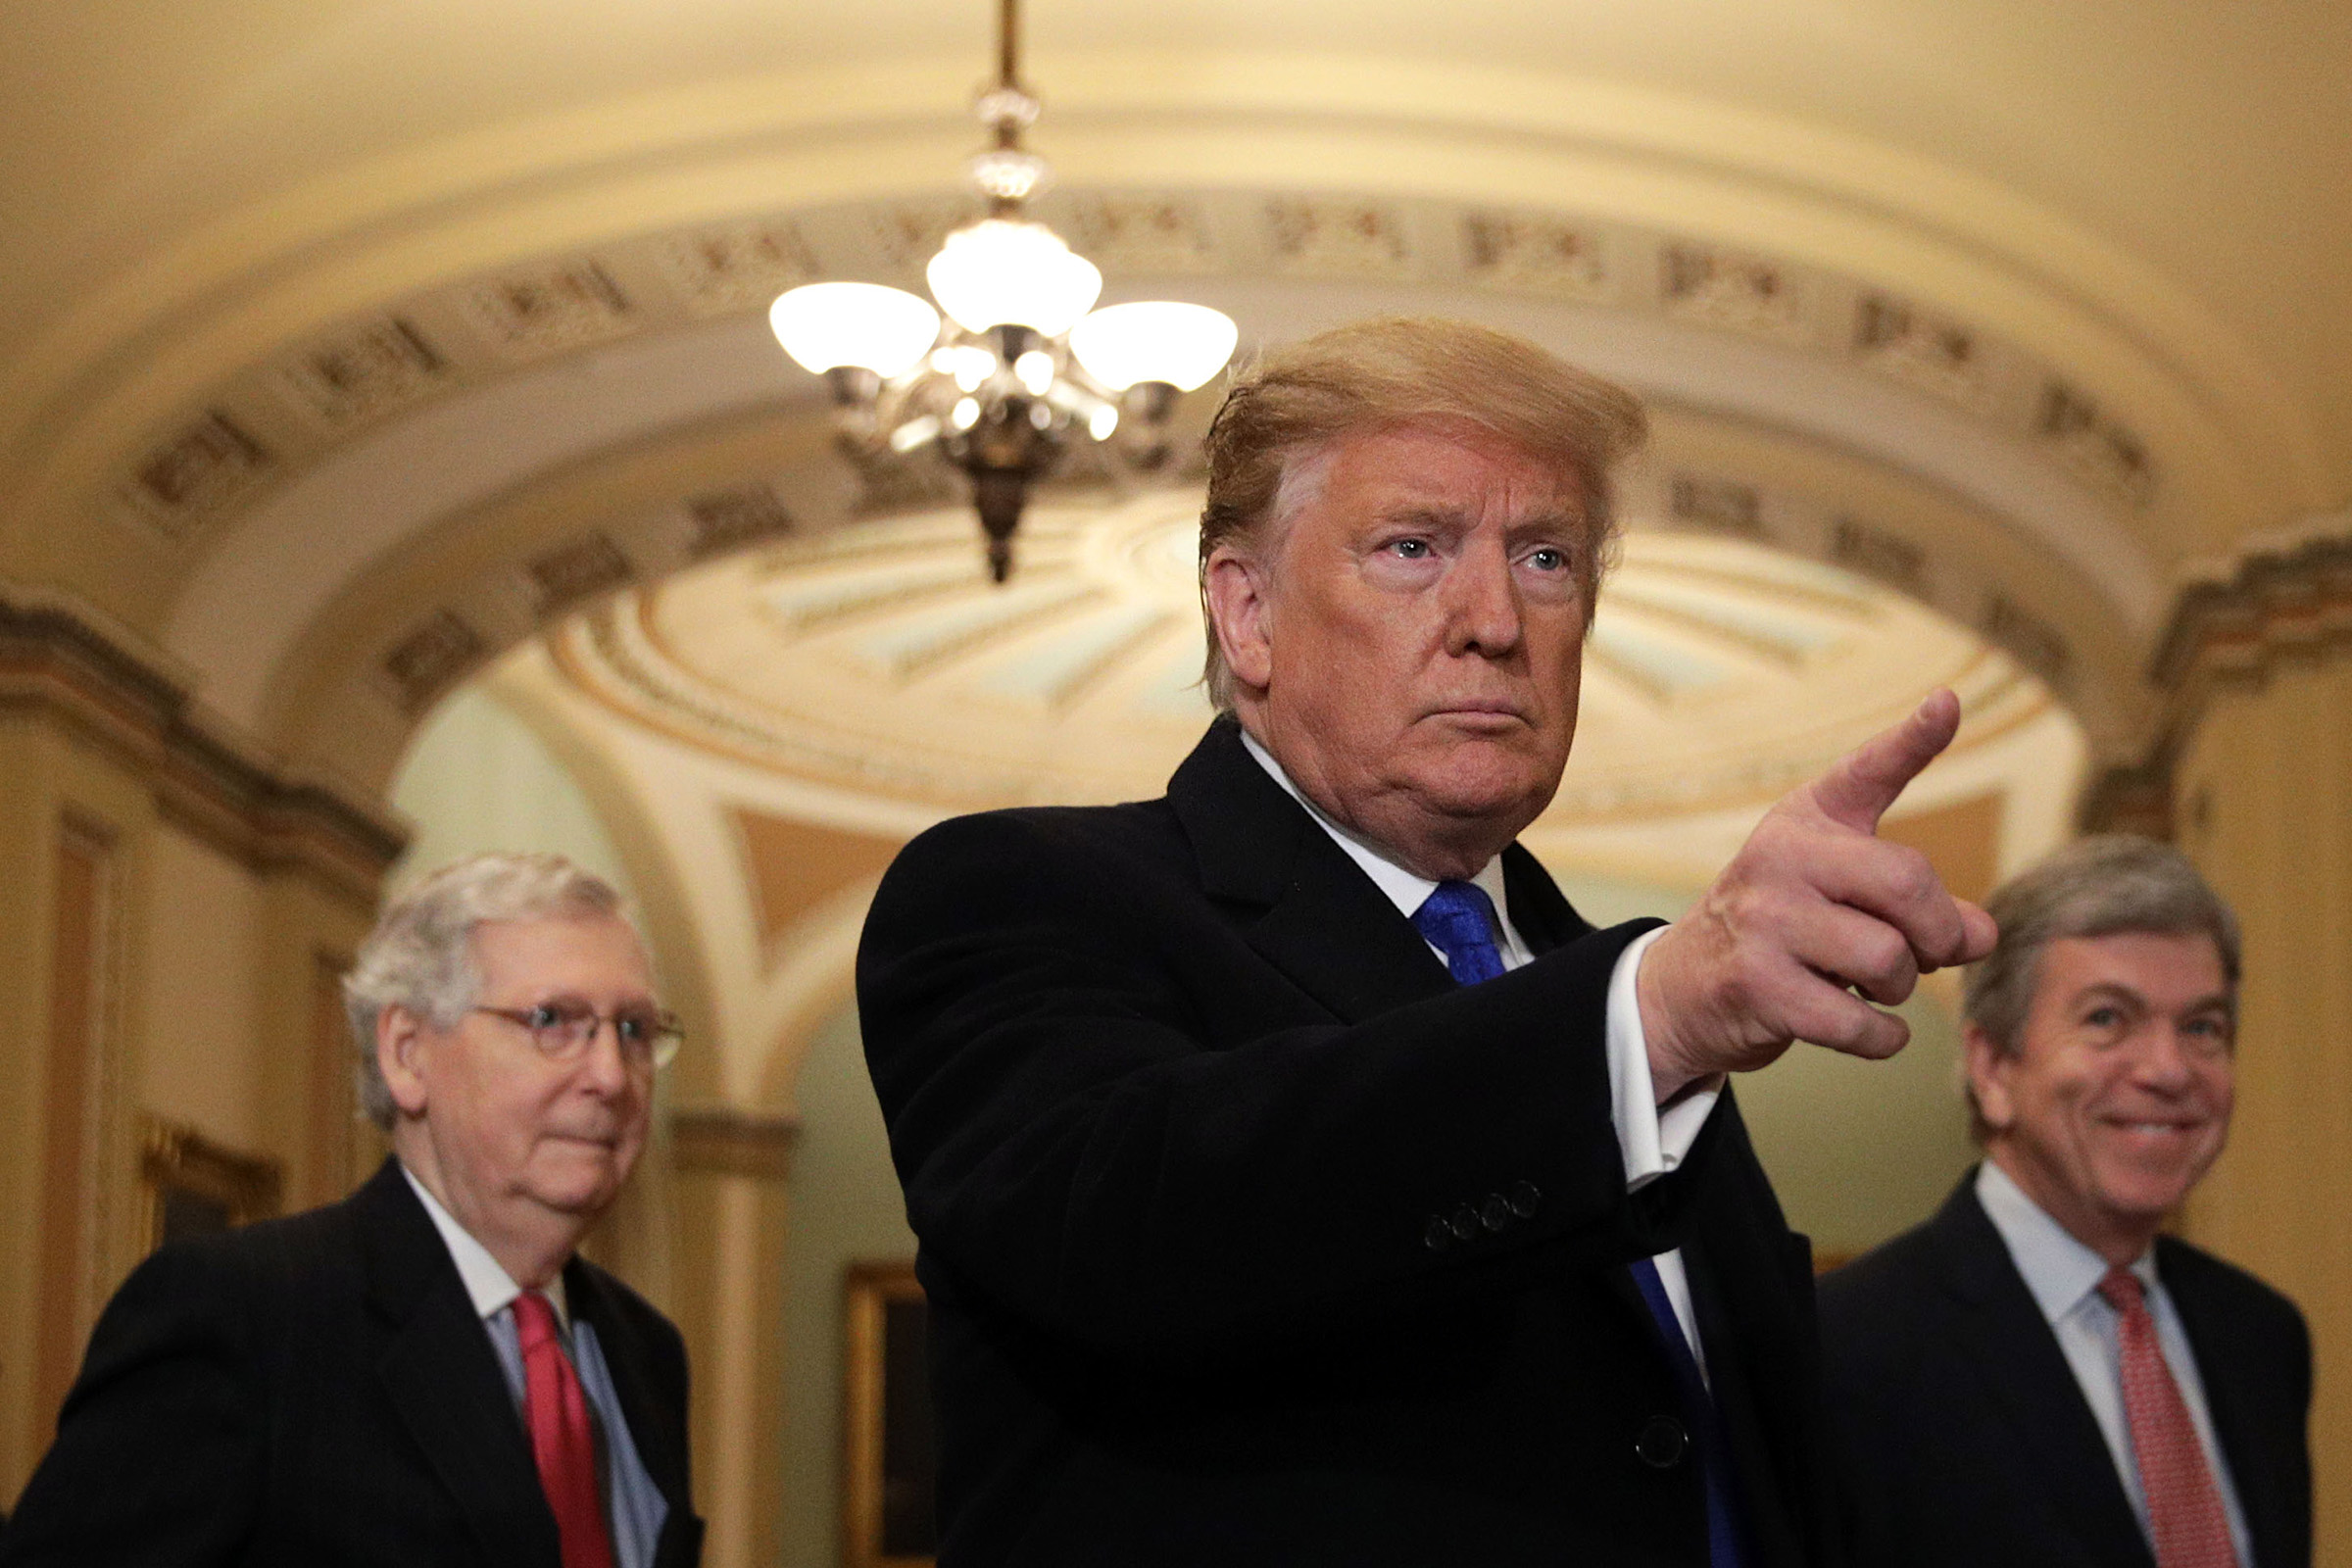 U.S. President Donald Trump (C) speaks to members of the media as Senate Majority Leader Sen. Mitch McConnell (R-KY) (L), and Sen. Roy Blunt (R-MO) (R) look on at the U.S. Capitol in Washington, DC on March 26, 2019.